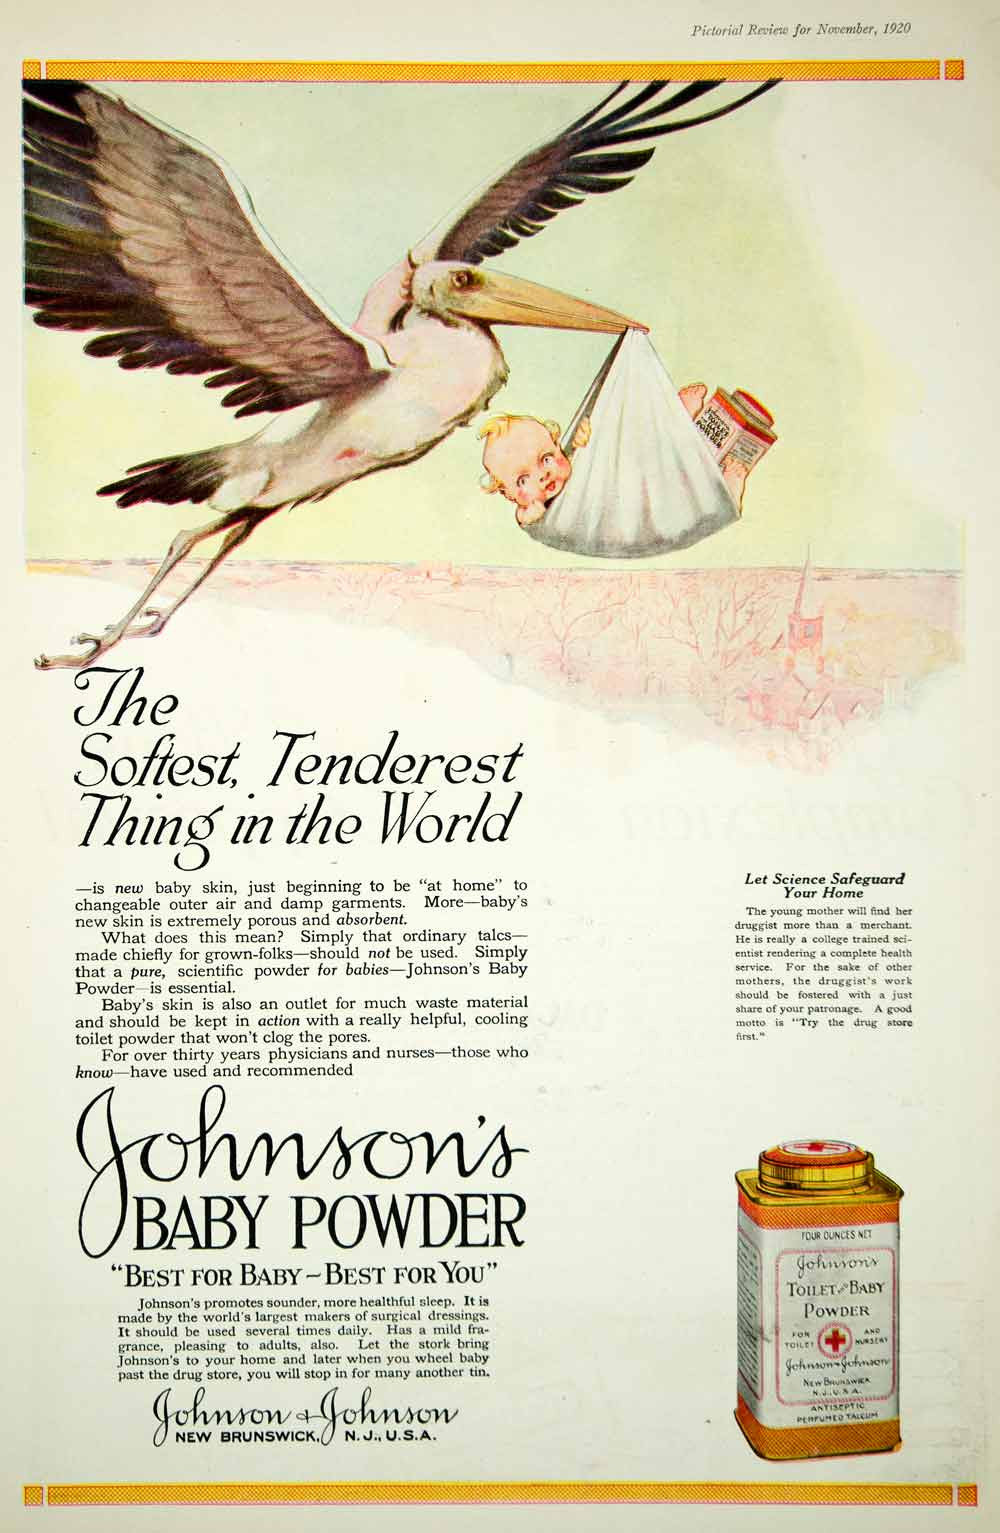 1920 Ad Vintage Johnson's Toilet Baby Powder Stork Carrying Infant Skin Care - Period Paper
